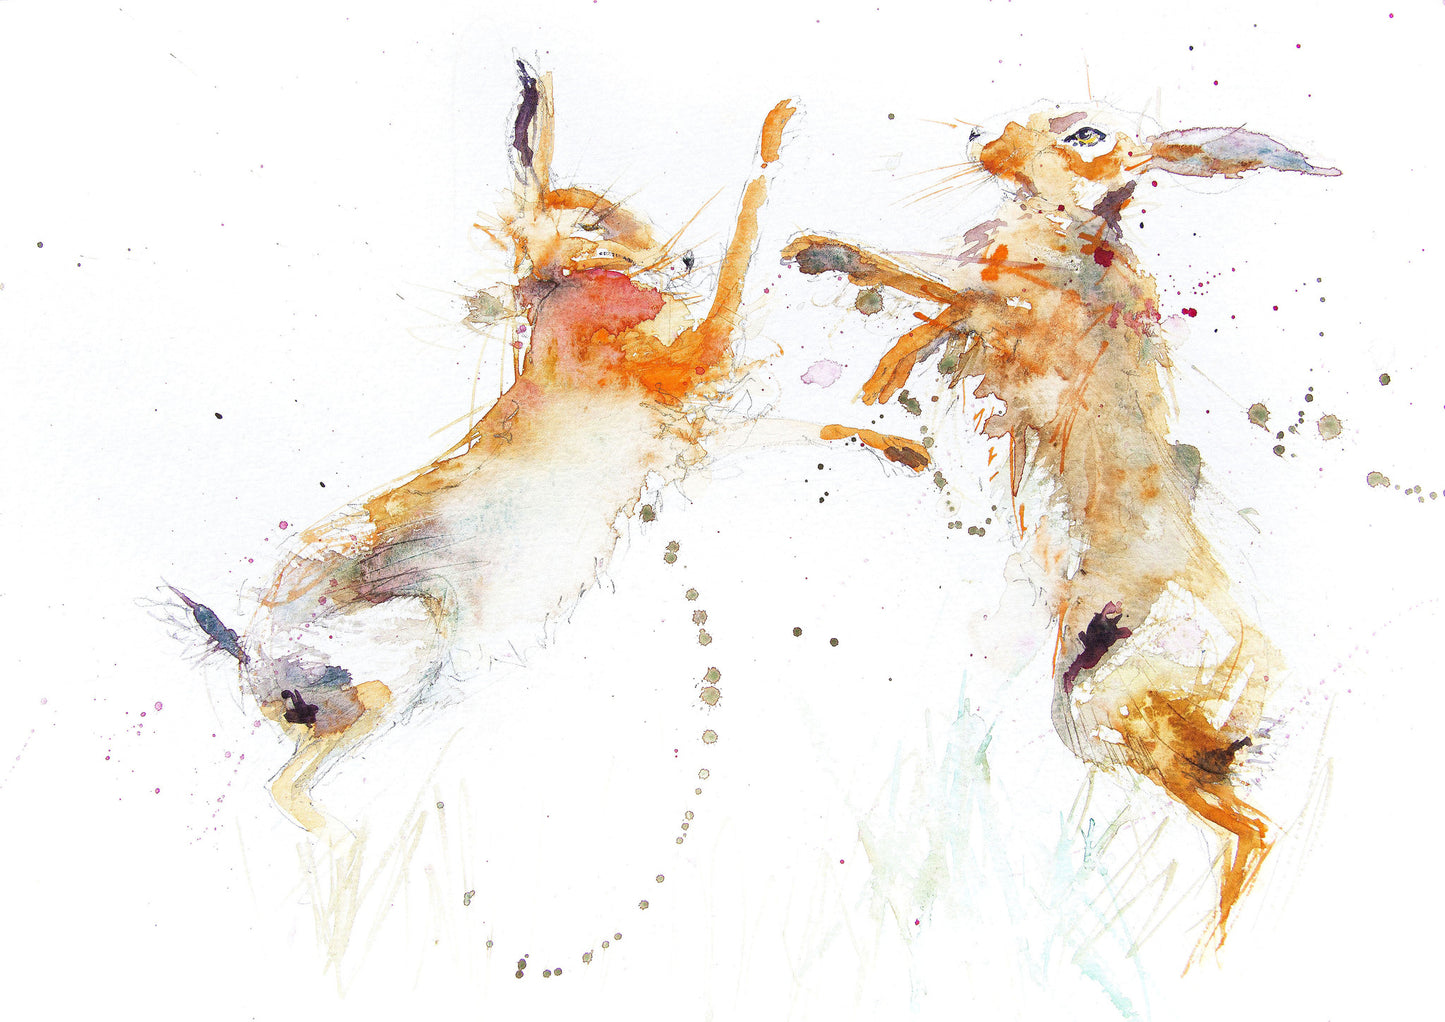 JEN BUCKLEY signed LIMITED EDITION PRINT of my original BOXING HARES - Jen Buckley Art limited edition animal art prints